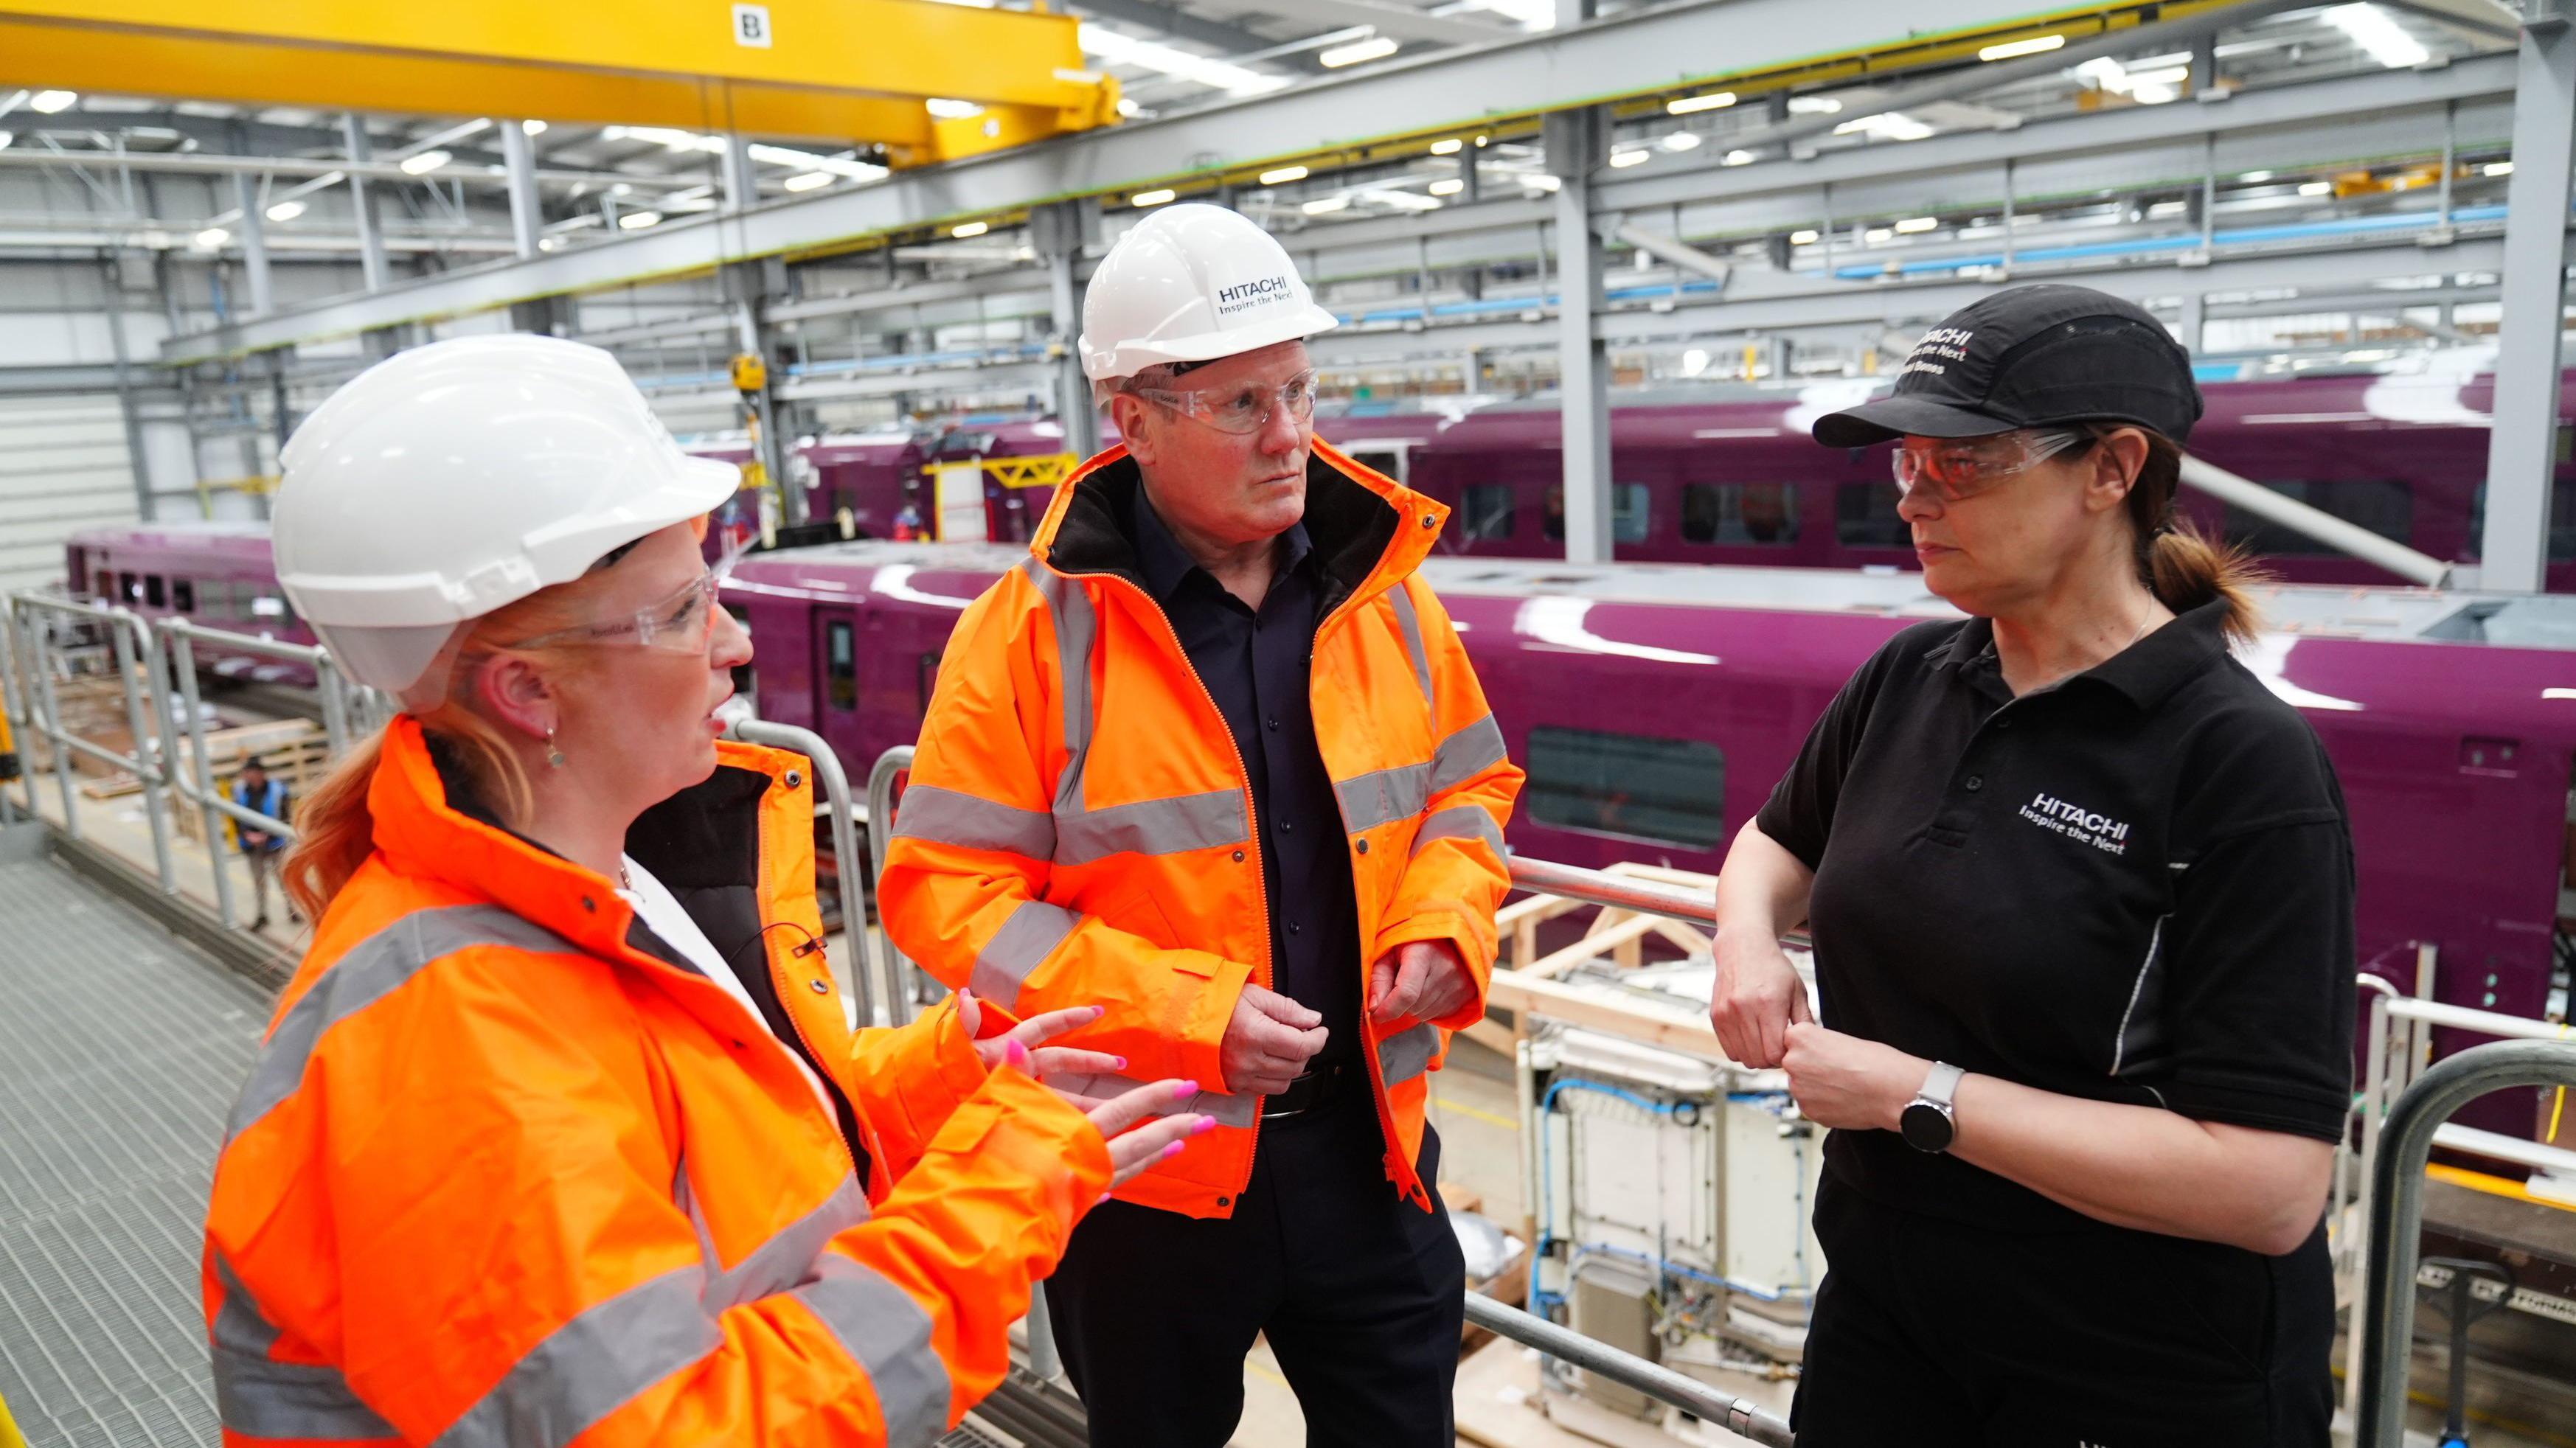 starmer vows long-term plan for train manufacturing